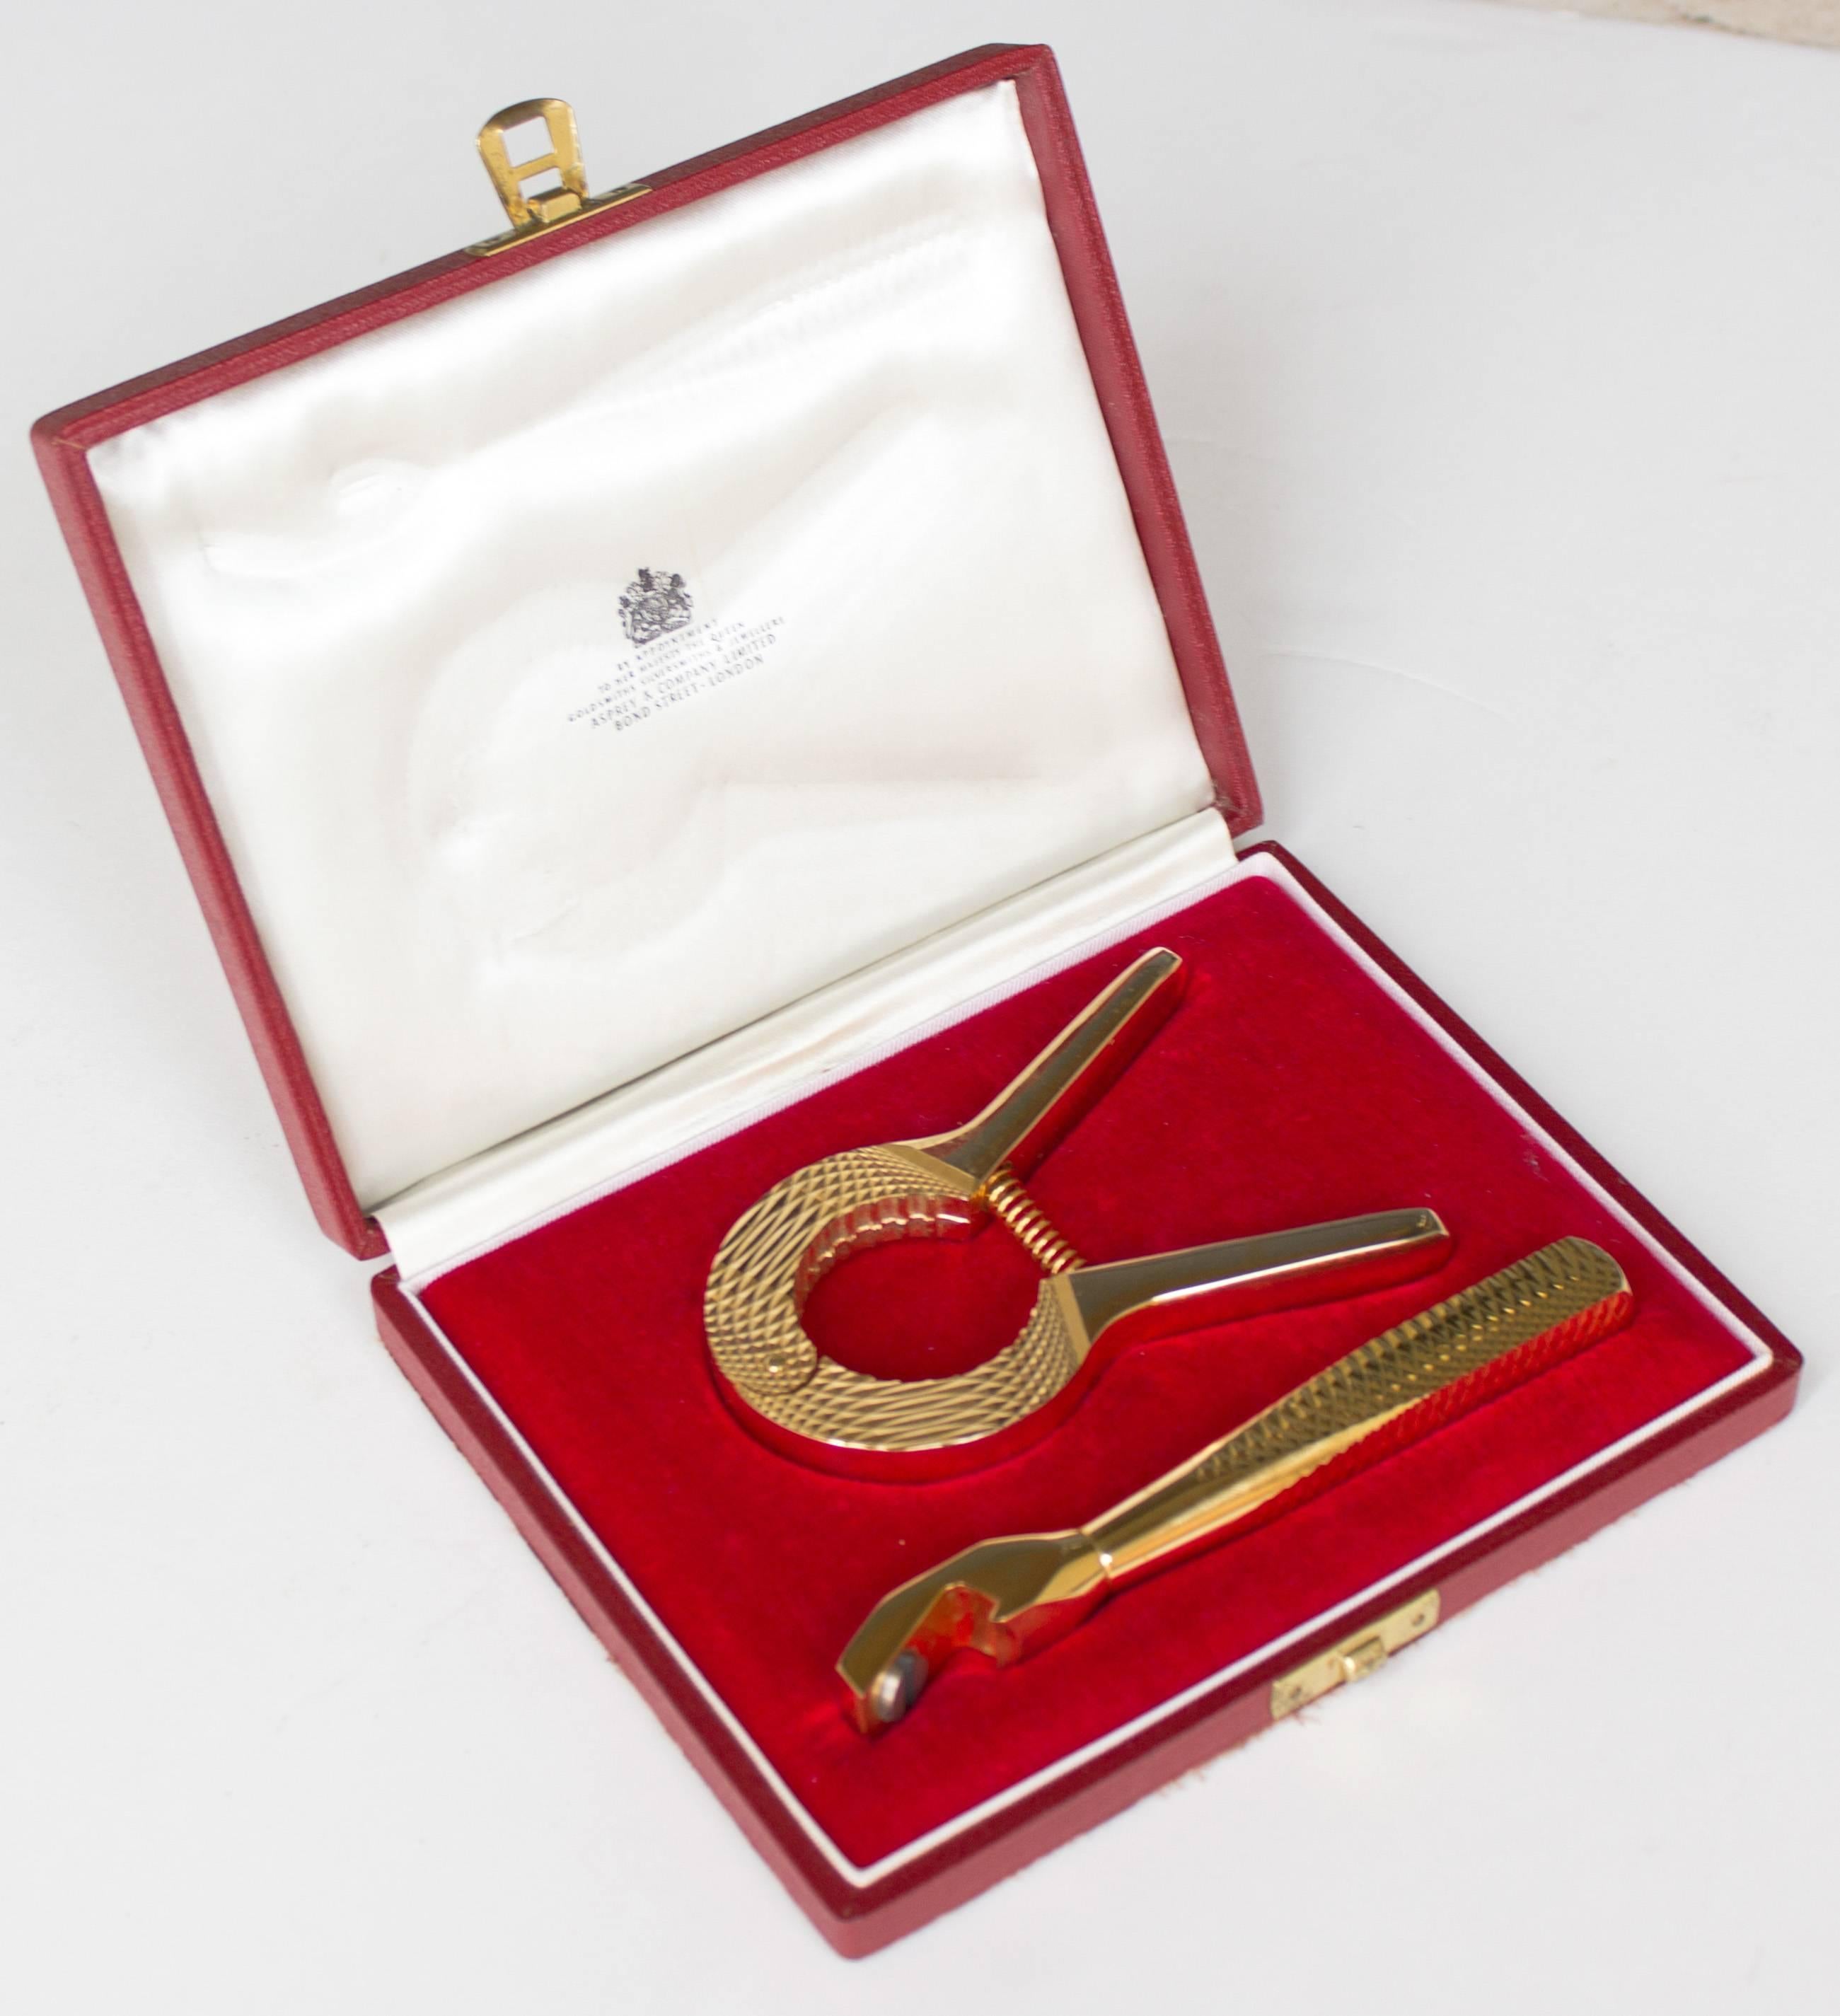 A two-piece bar tools set from Asprey, one of the United Kingdoms oldest premier designers of jewelry and luxury goods. Each piece is gold plated and textured in a diamond pattern.

Set includes a bottle opener and champagne cork remover,